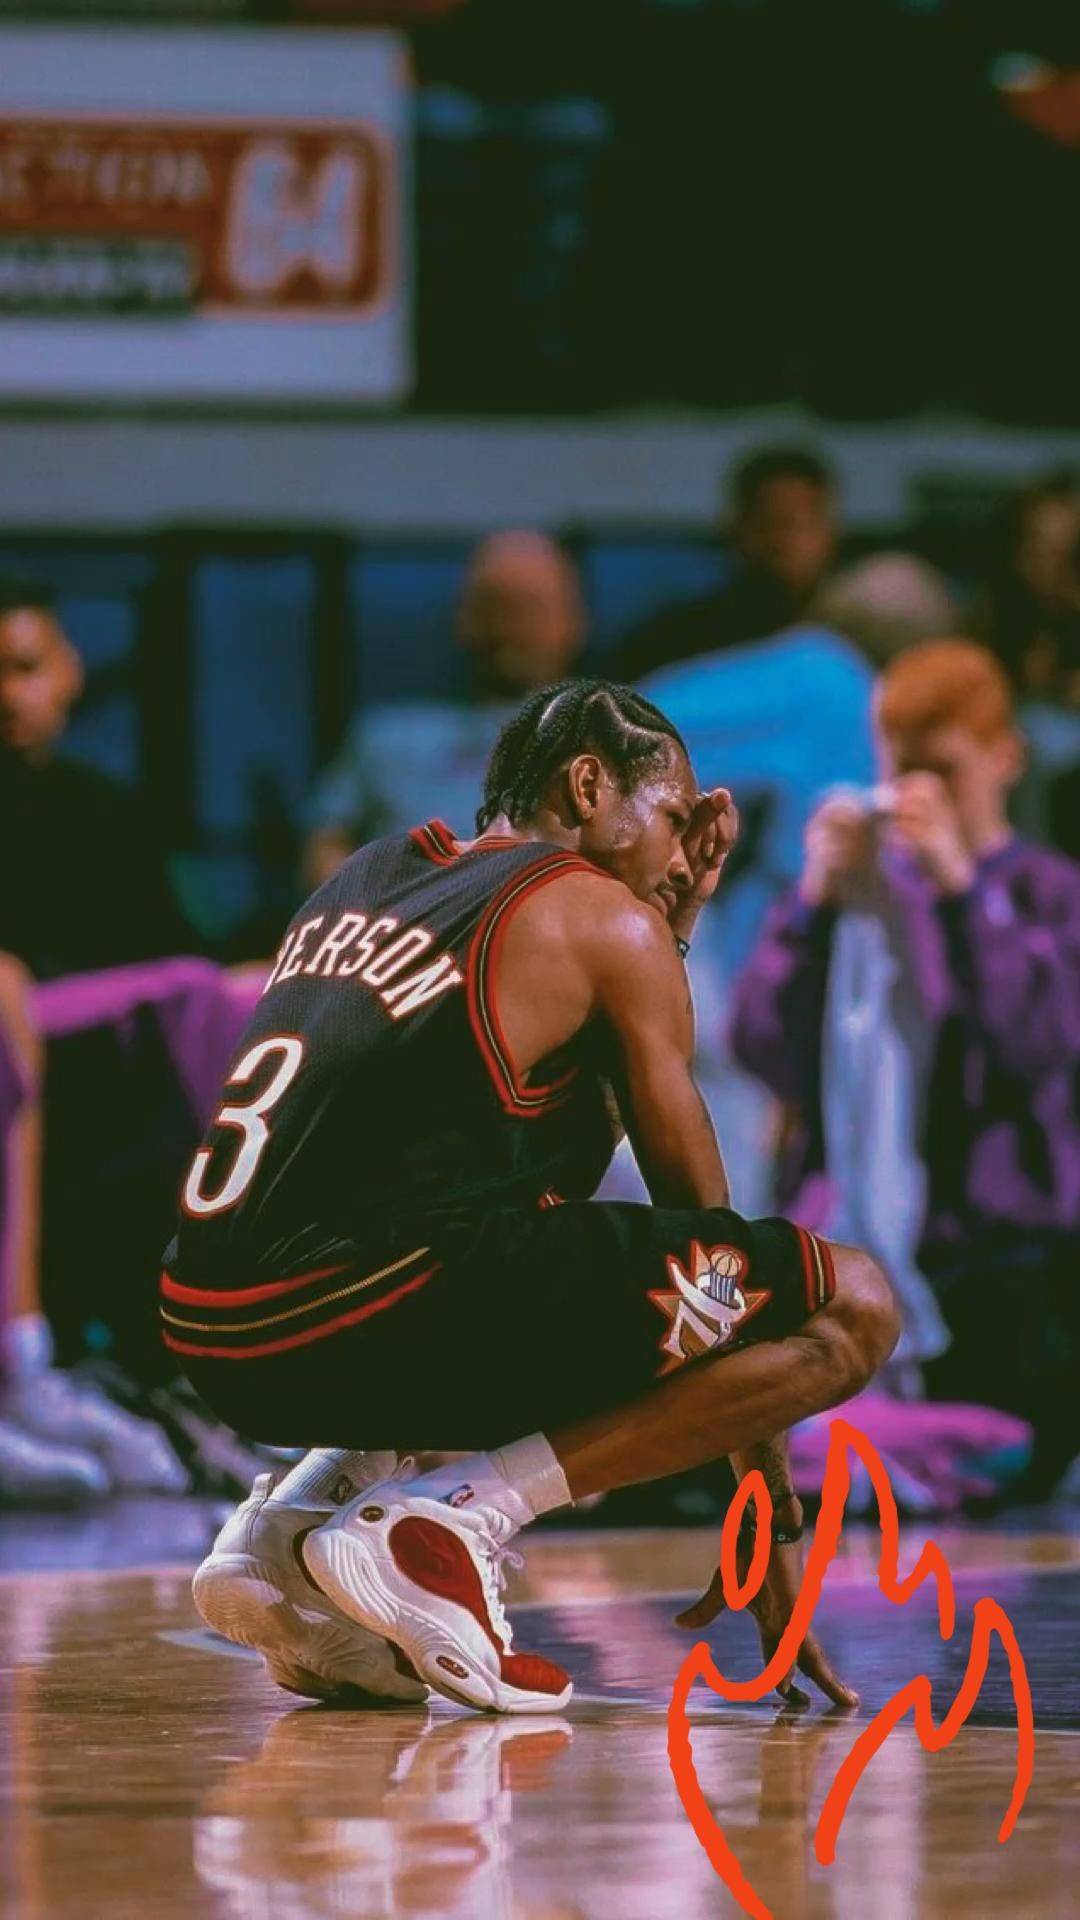 A man is kneeling on the floor of an arena - Basketball, NBA